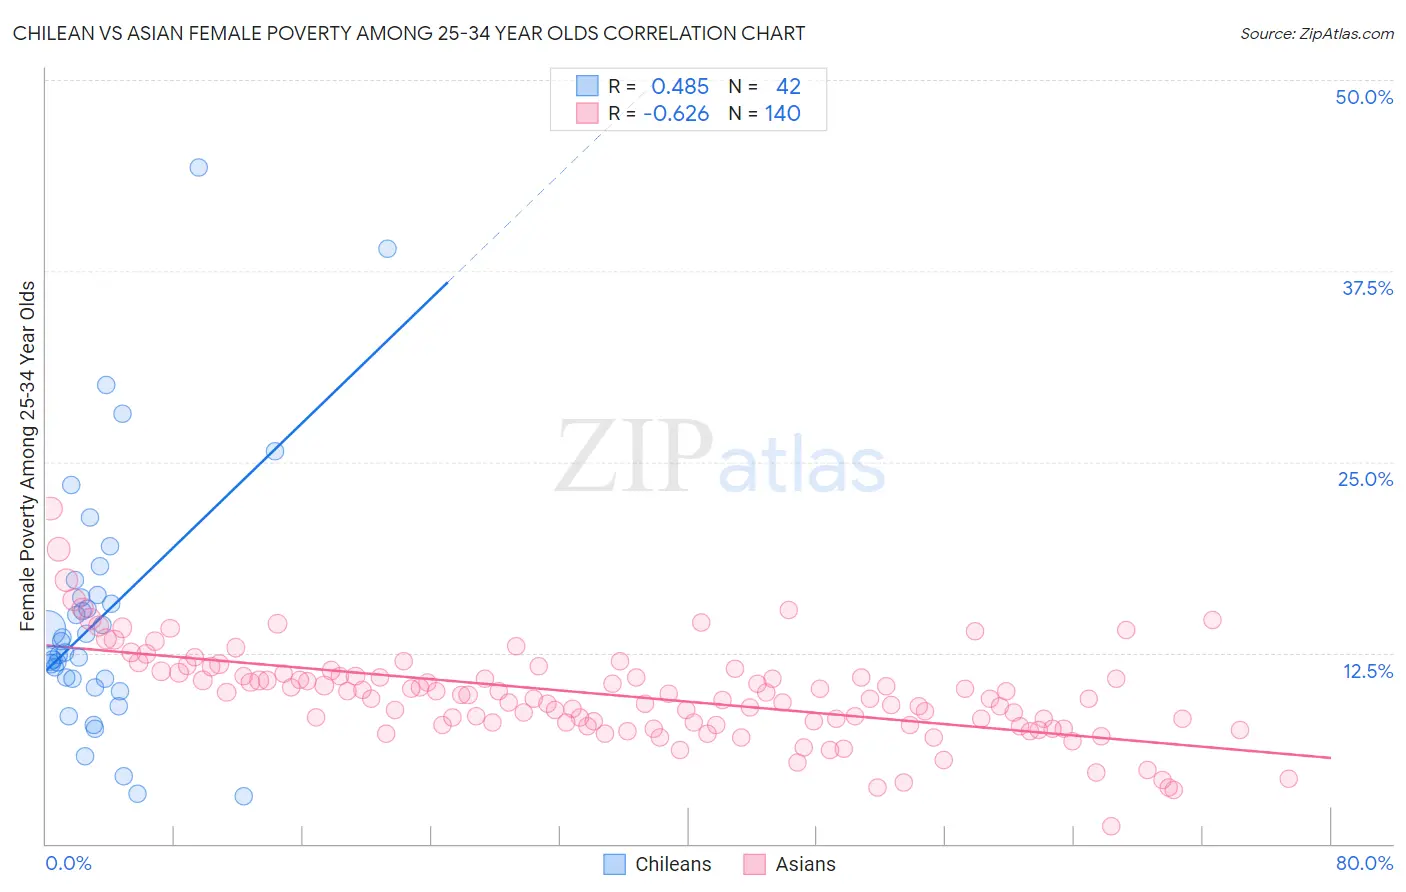 Chilean vs Asian Female Poverty Among 25-34 Year Olds